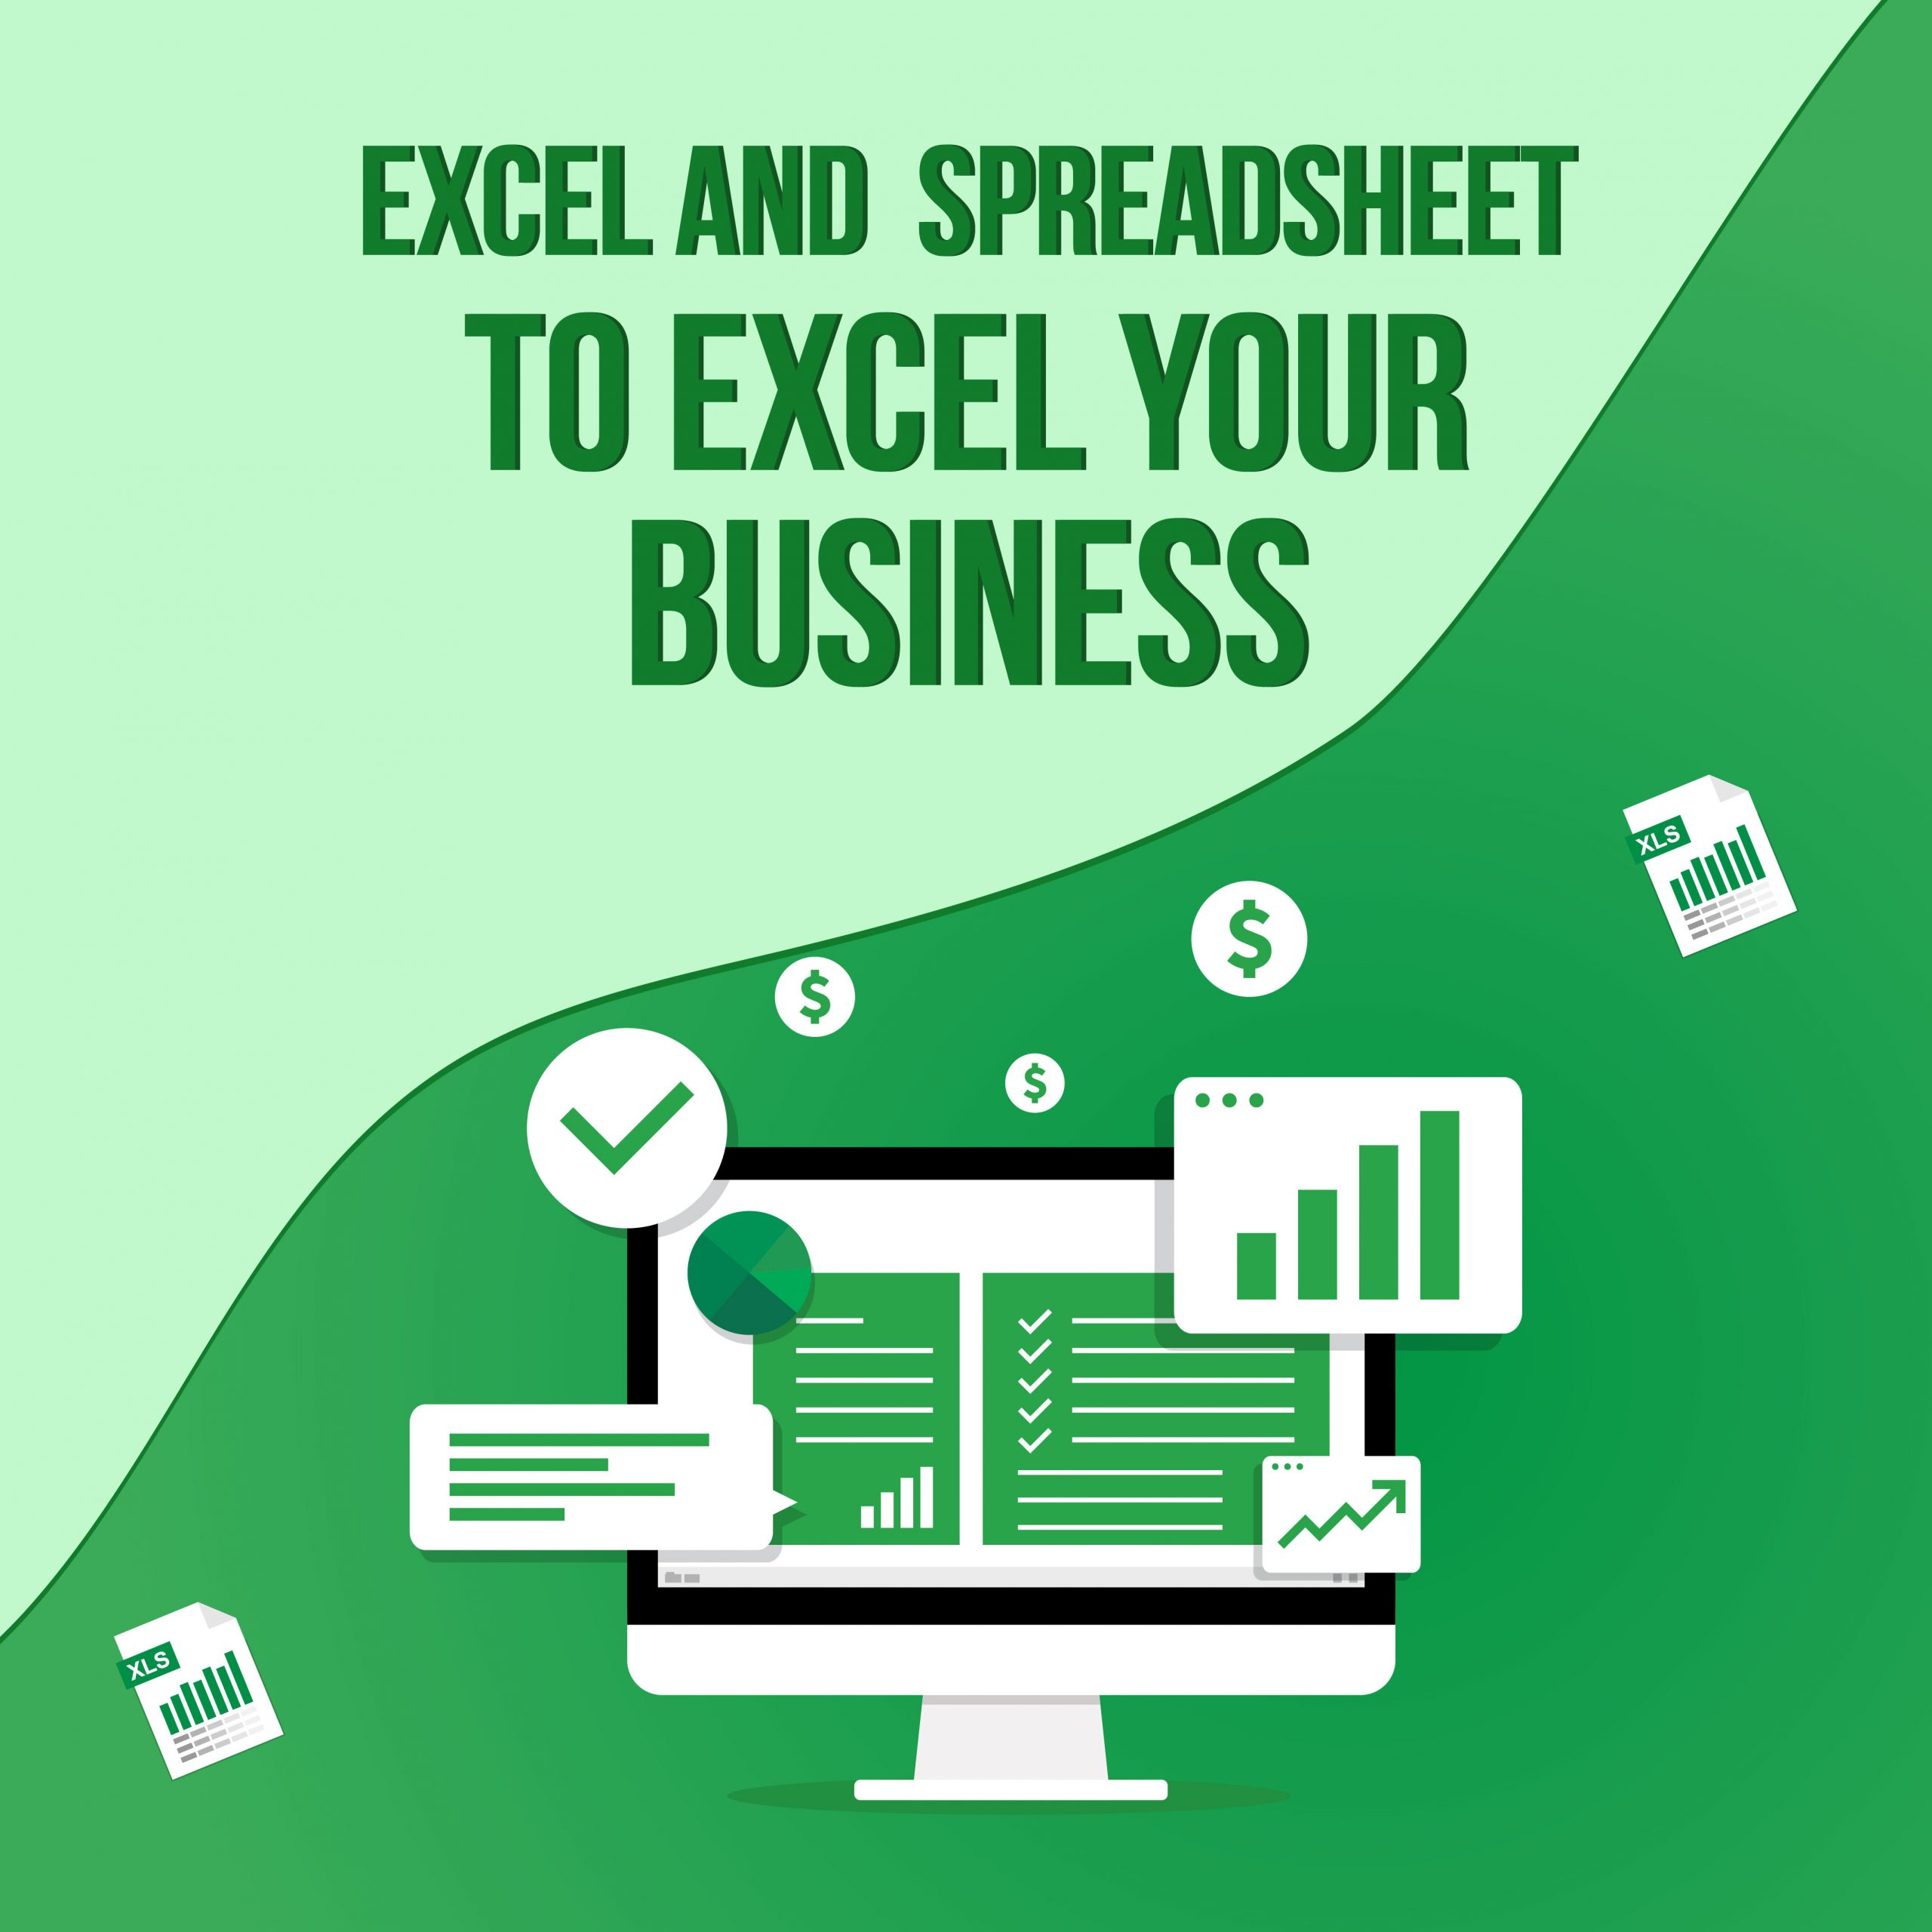 Microsoft Excel and Google Spreadsheet to Grow Your Business